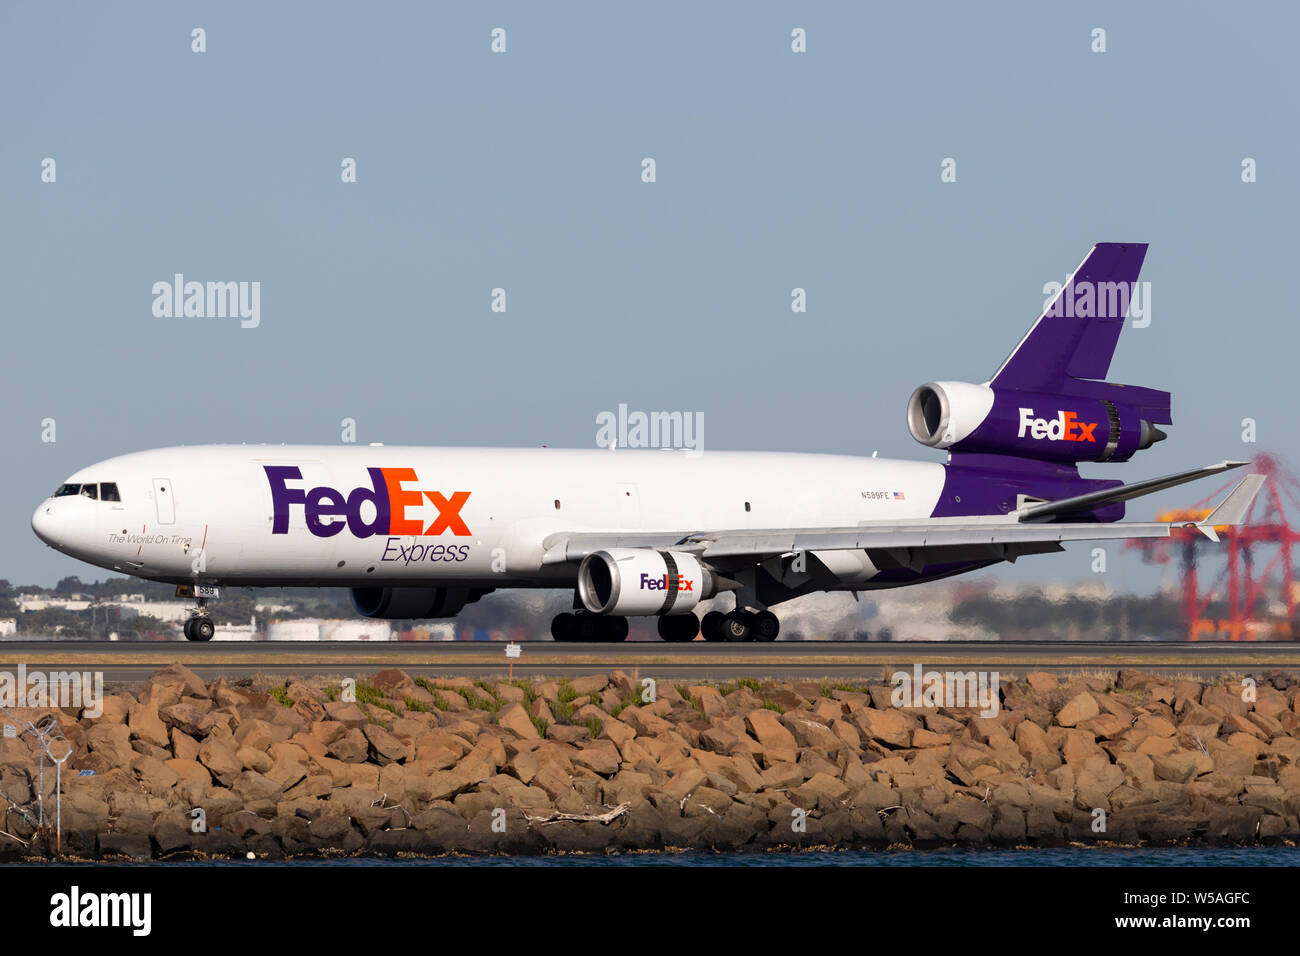 Federal Express (FedEx) McDonnell Douglas MD-11F cargo aircraft at Sydney Airport. Stock Photo